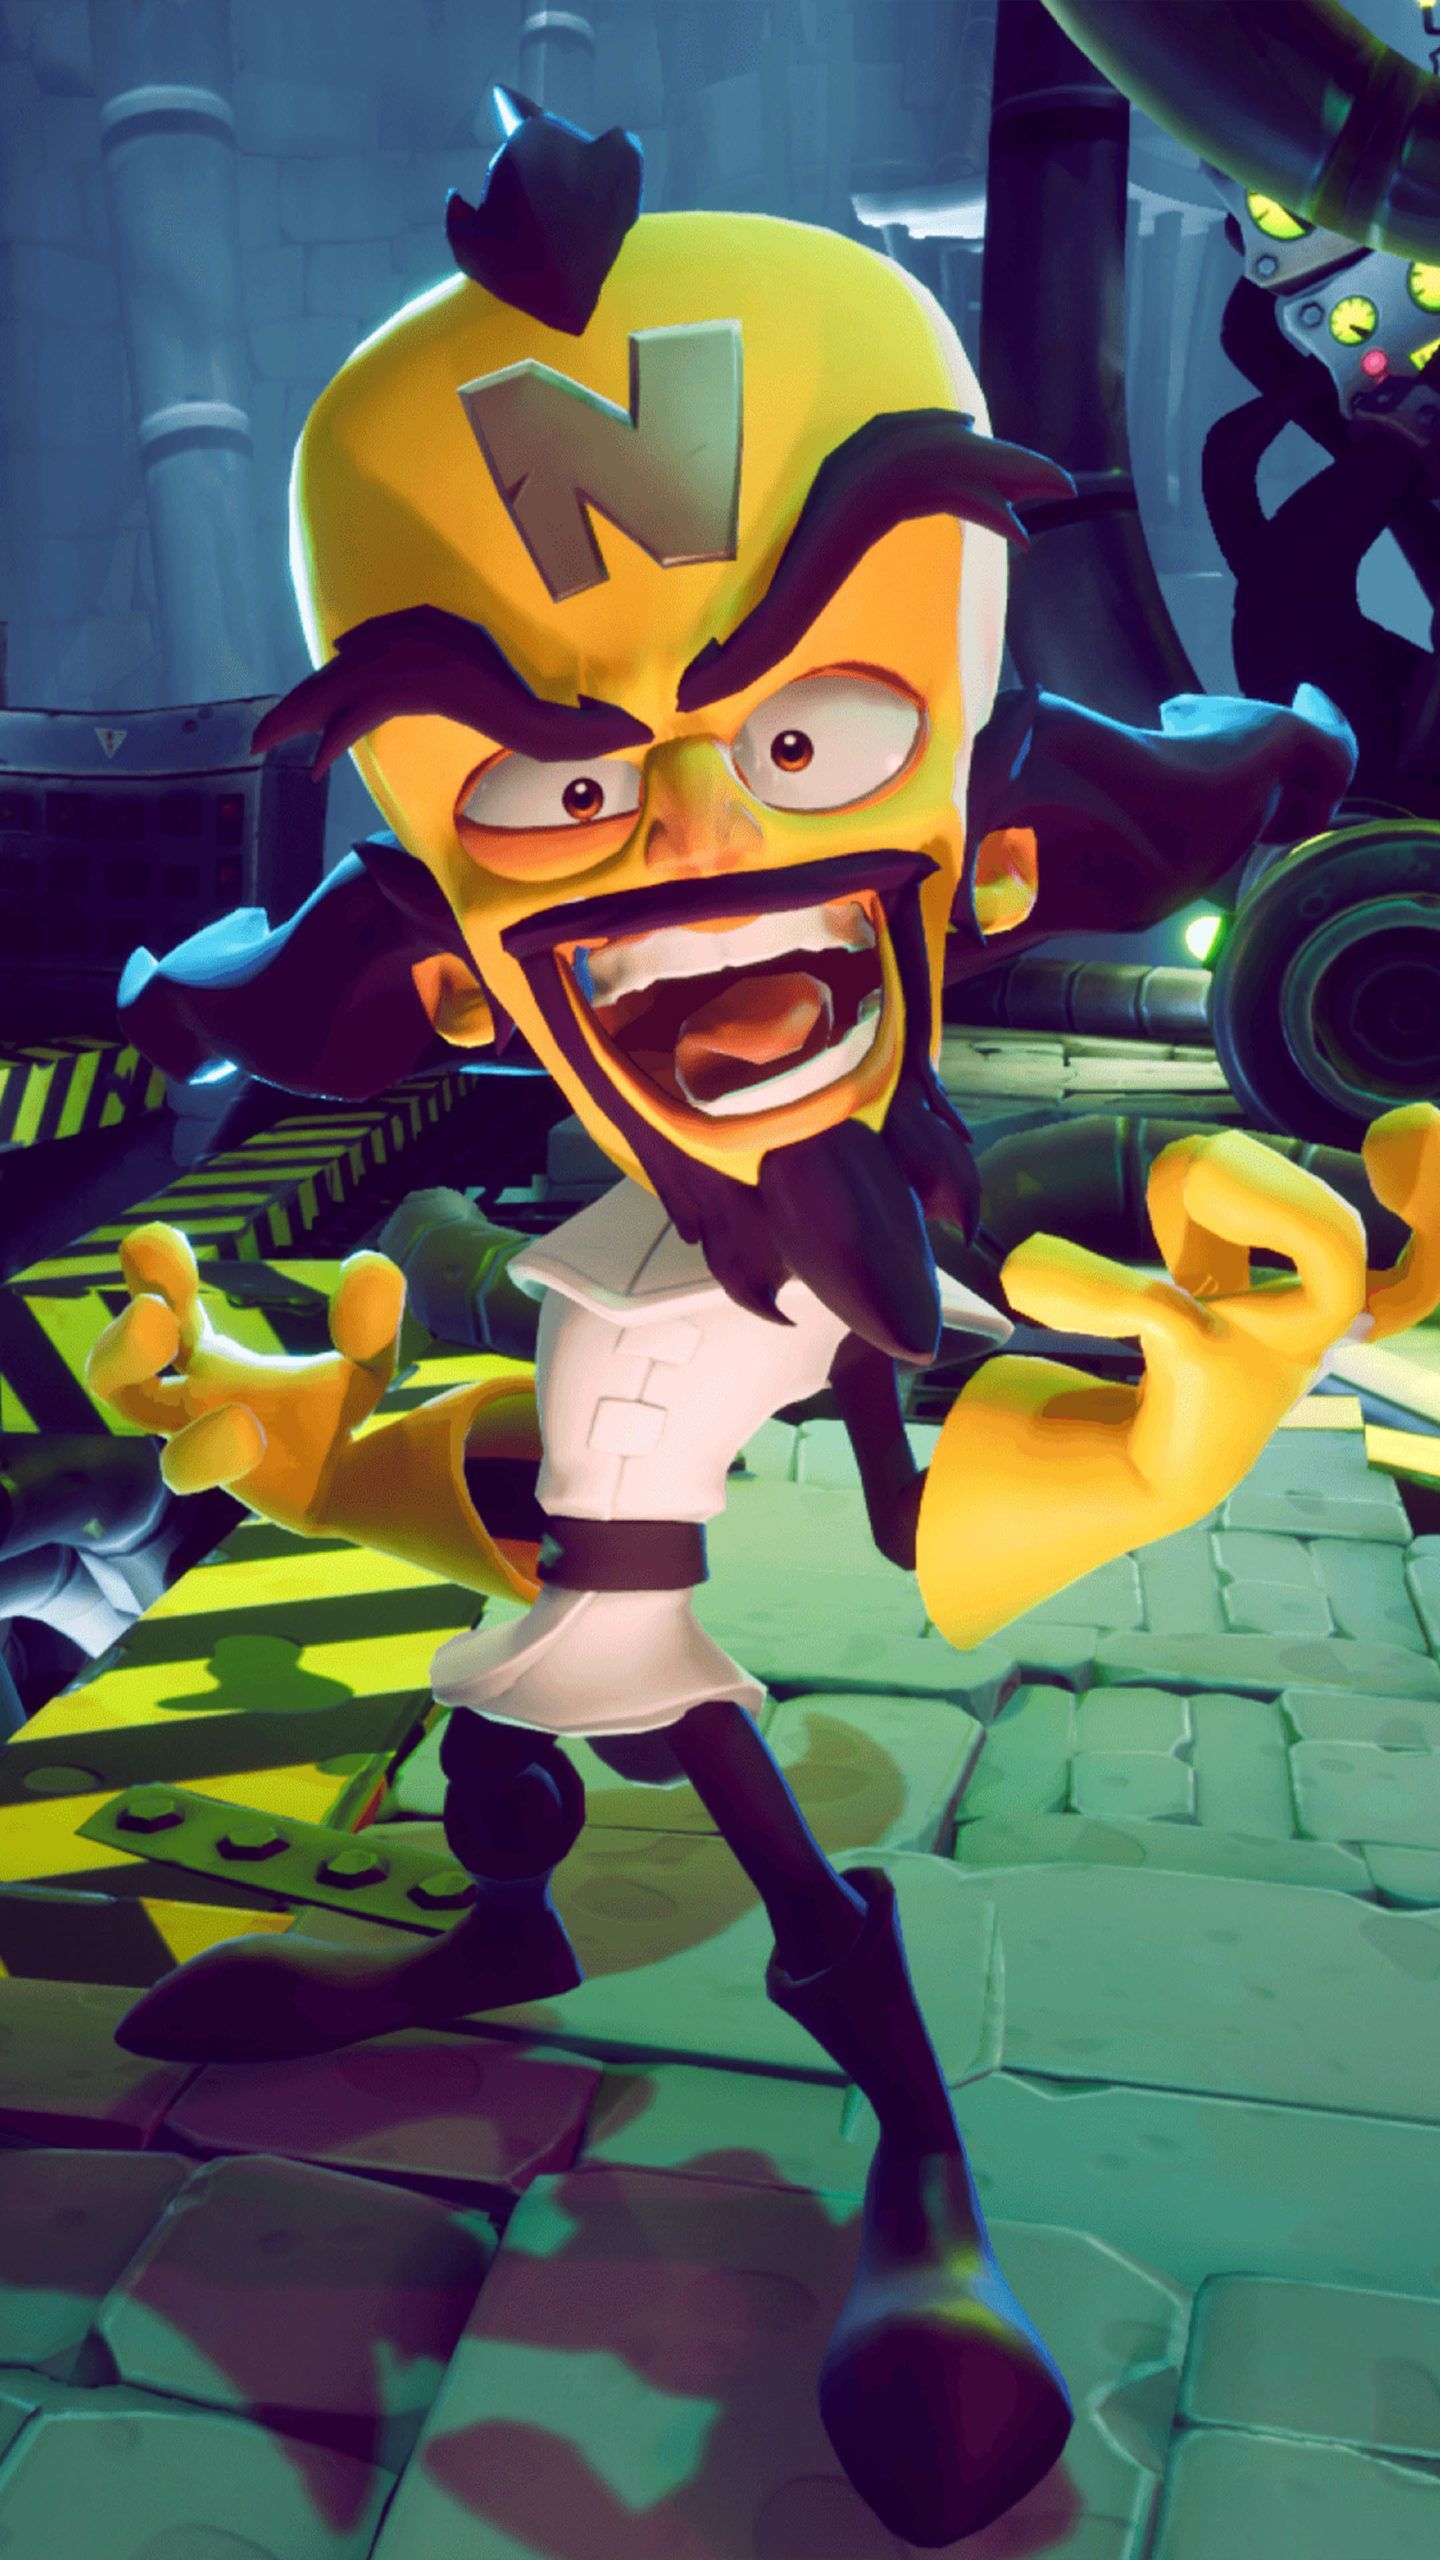 Doctor Neo Cortex In Crash Bandicoot 4 It's About Time 4K Ultra HD Mobile Wallpaper. Crash bandicoot characters, Crash bandicoot, Bandicoot